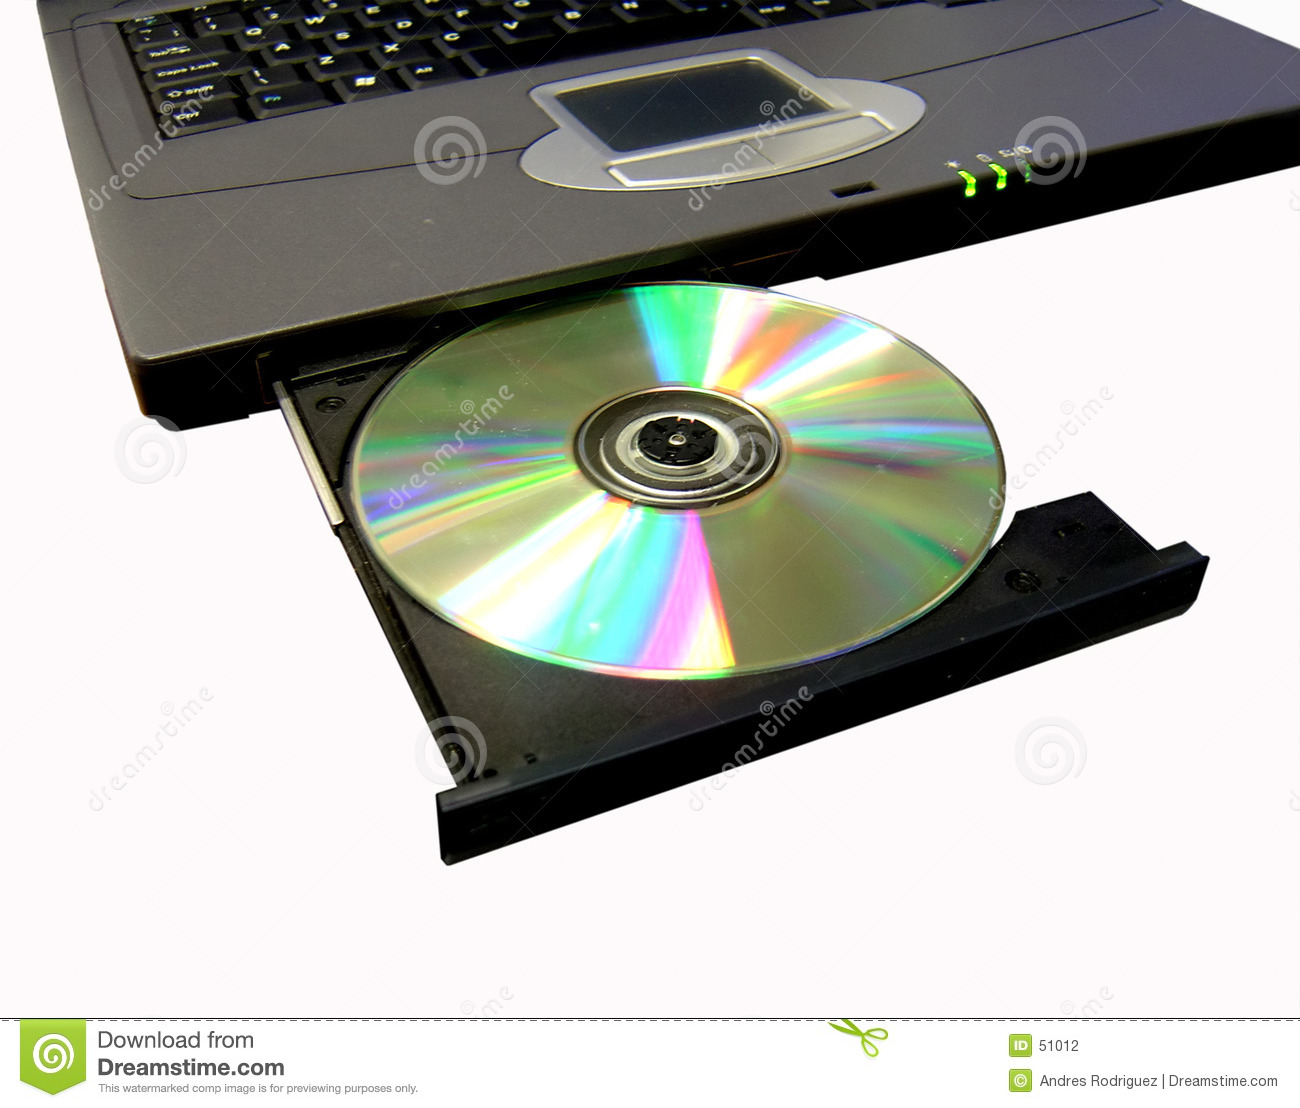 eject dvd in this computer